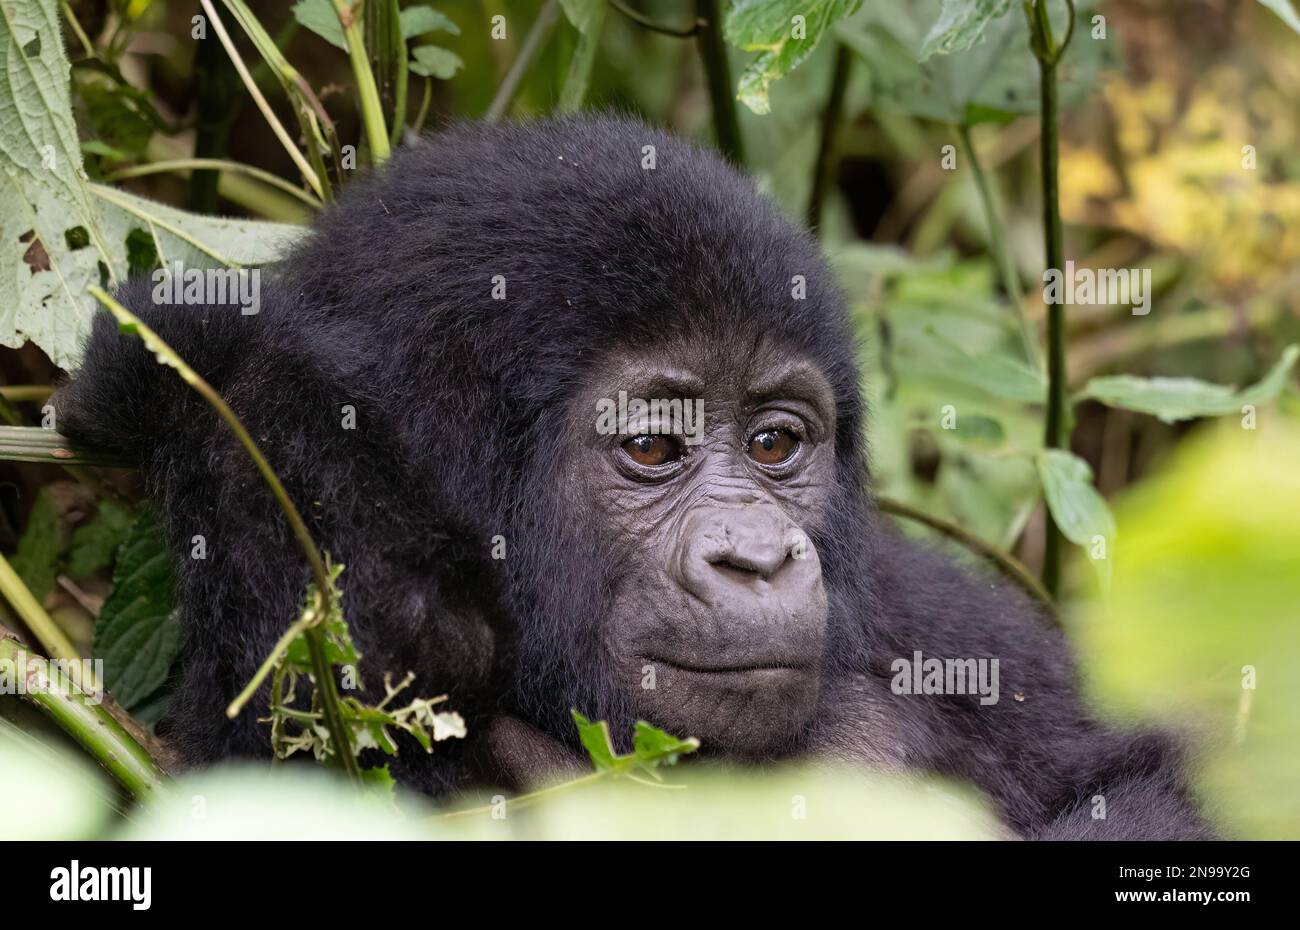 https://c8.alamy.com/comp/2N99Y2G/a-young-mountain-gorilla-gorilla-beringei-beringei-has-a-short-rest-whilst-playing-in-bwindi-impenetrable-forest-uganda-2N99Y2G.jpg